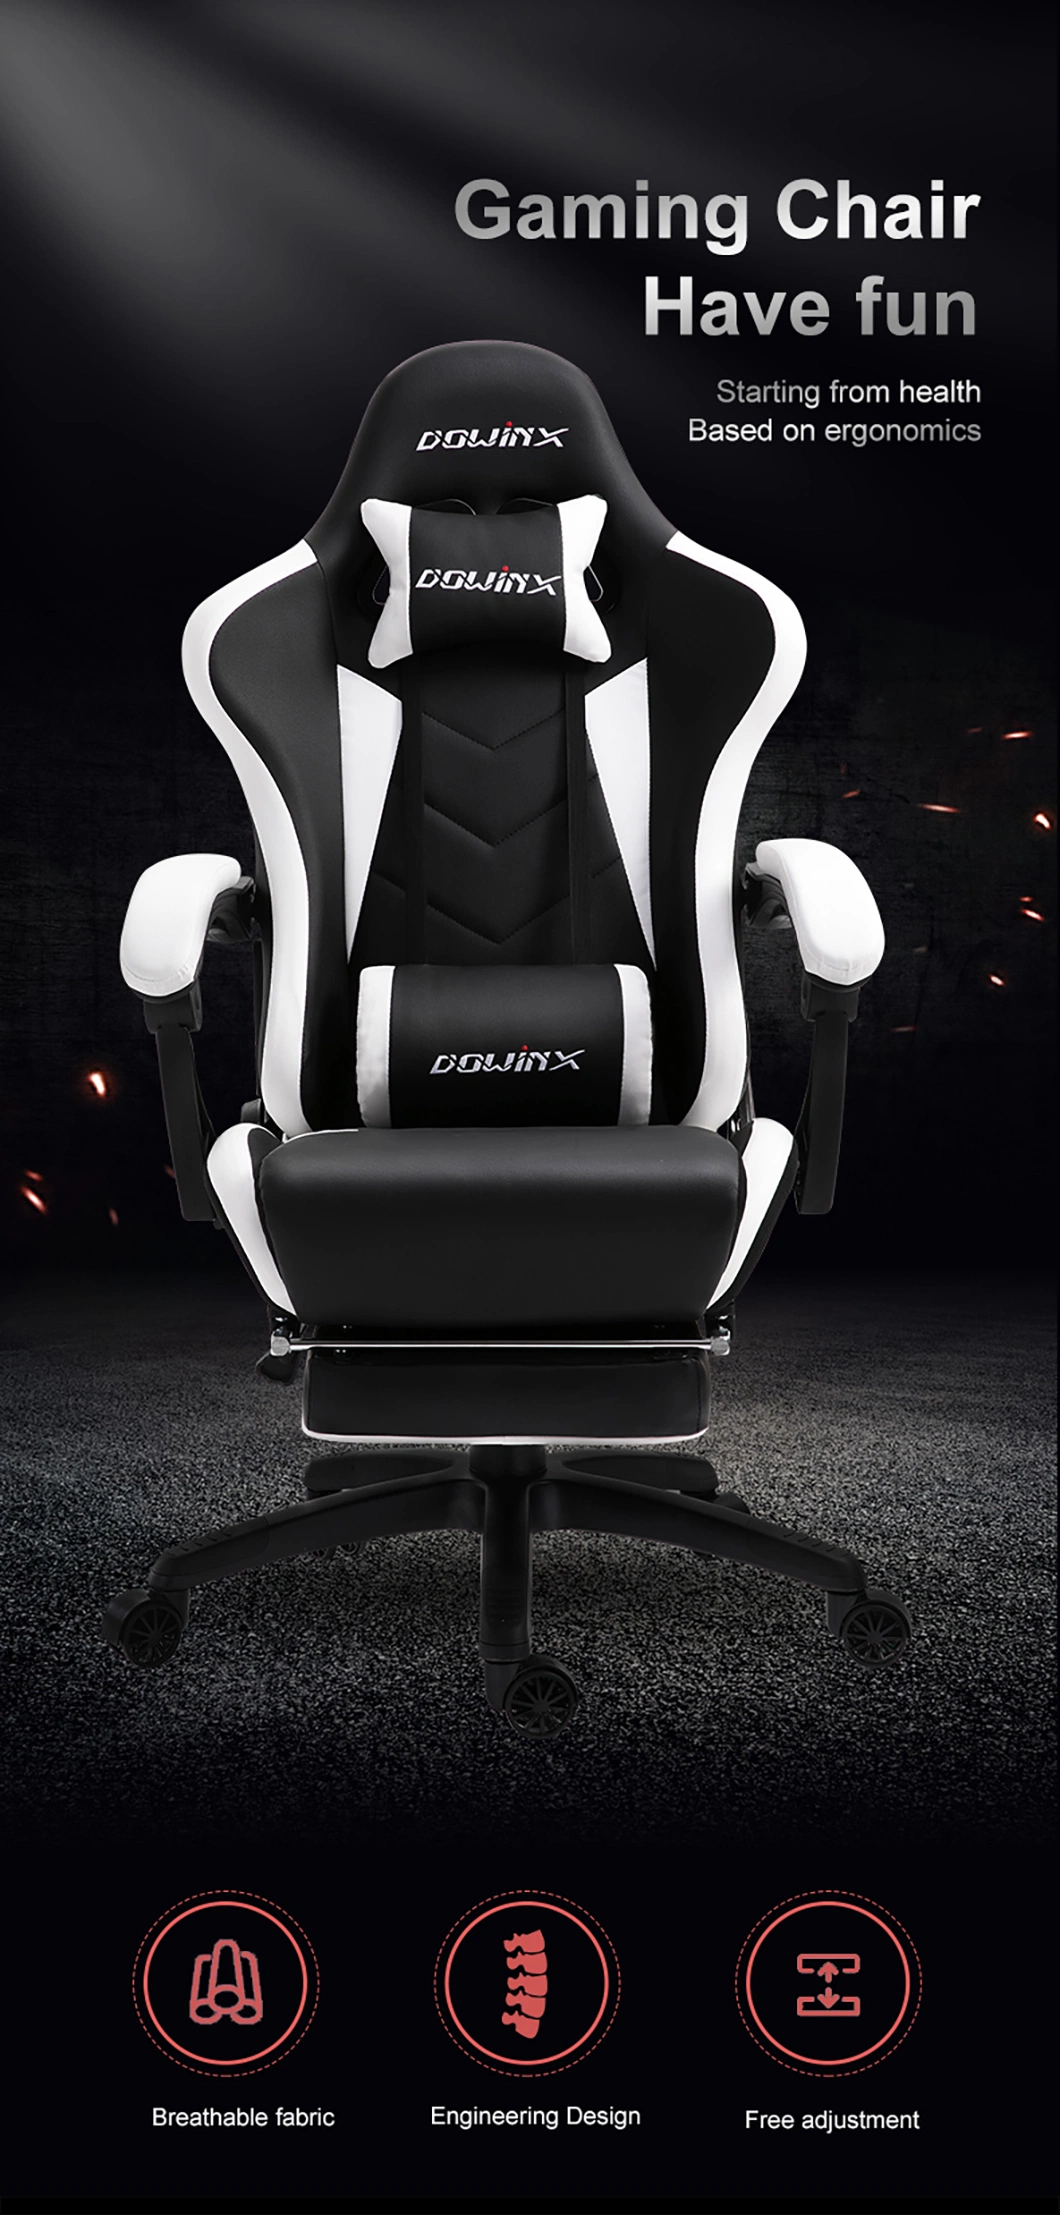 Black Adjustable Swivel Sport Leather Computer Chair Office Furniture Gaming Chair